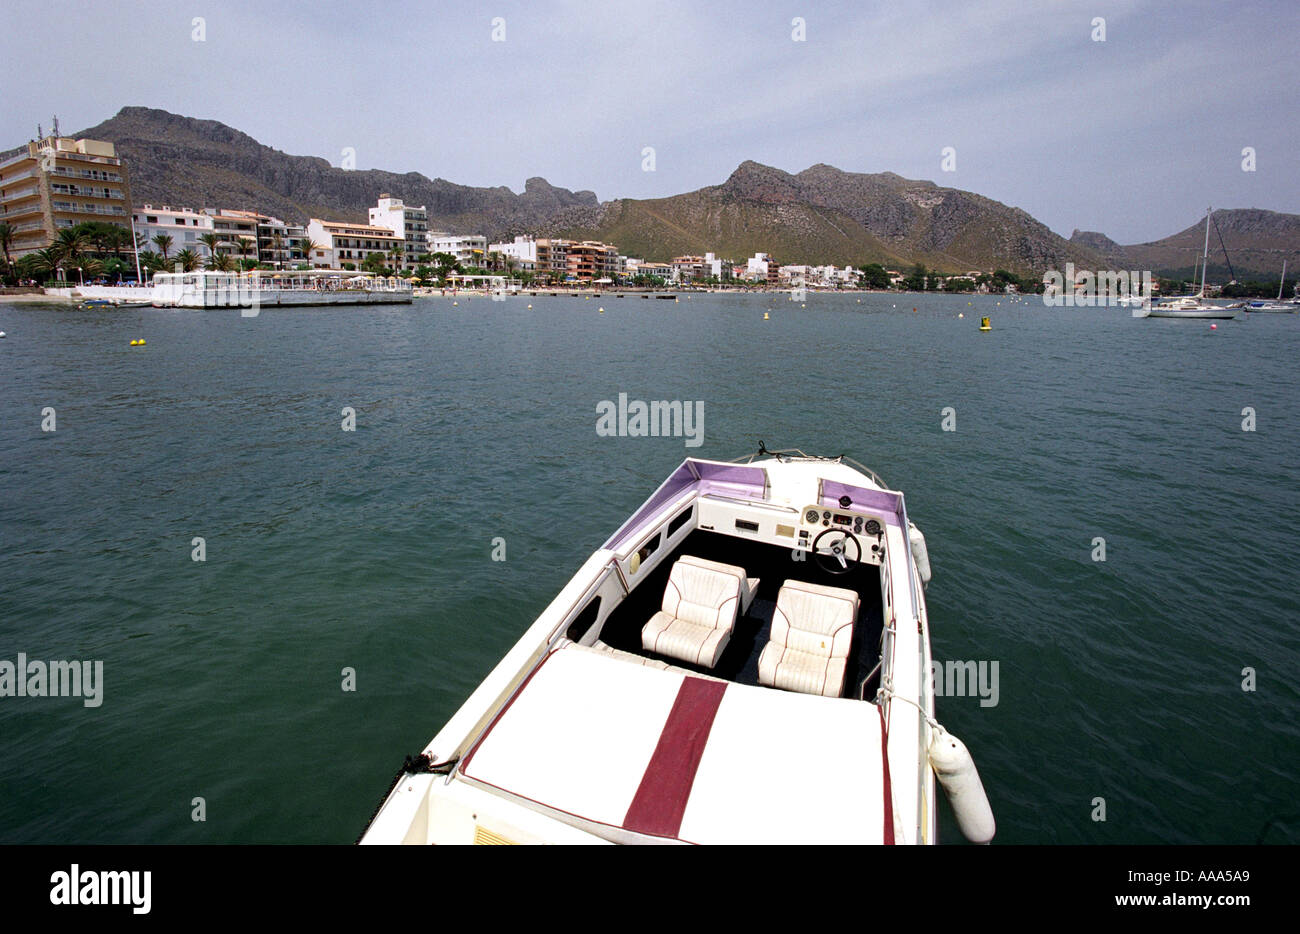 View over speedboat of Puerto Pollensa seafront and mountains in Majorca Stock Photo